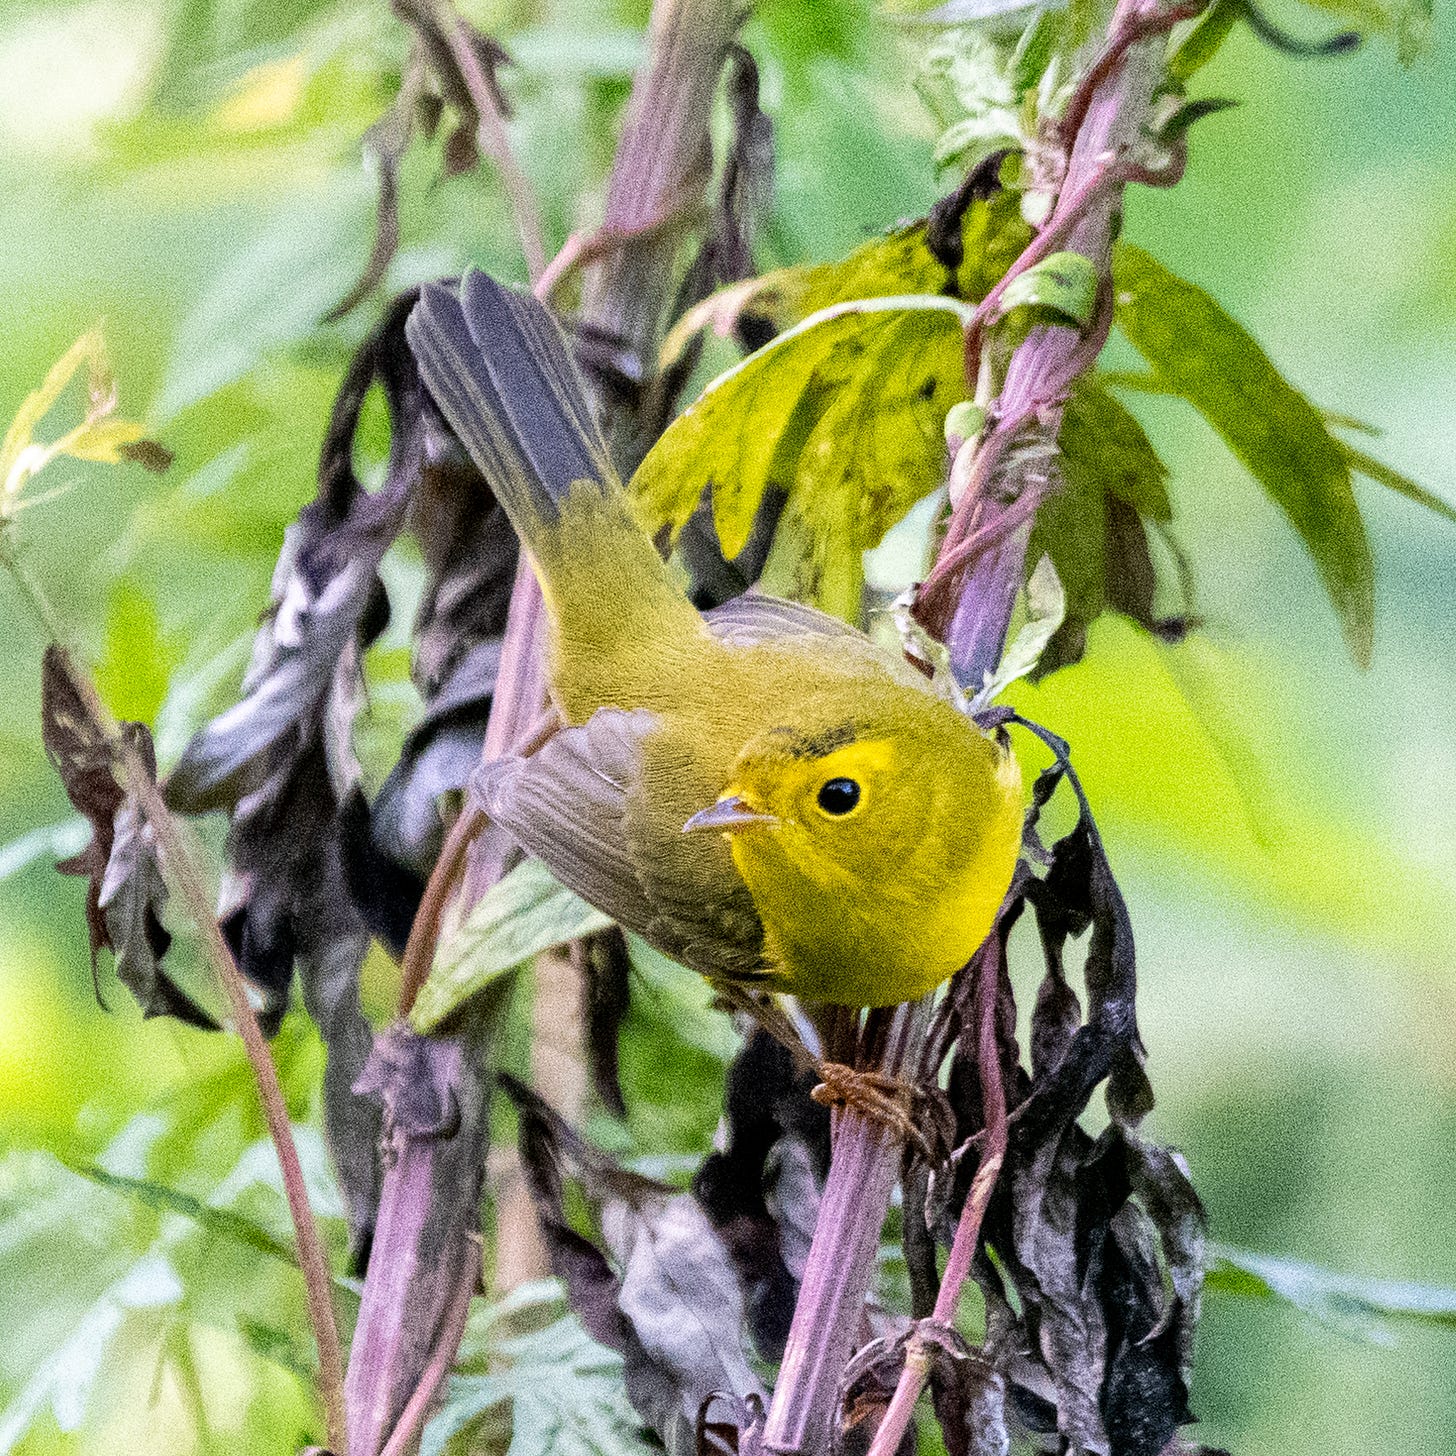 A Wilson's warbler, a small yellow bird with an olive back and dark tail, the cap of its head darkening as its plumage matures, perches on weed stalks in a zigzag posture